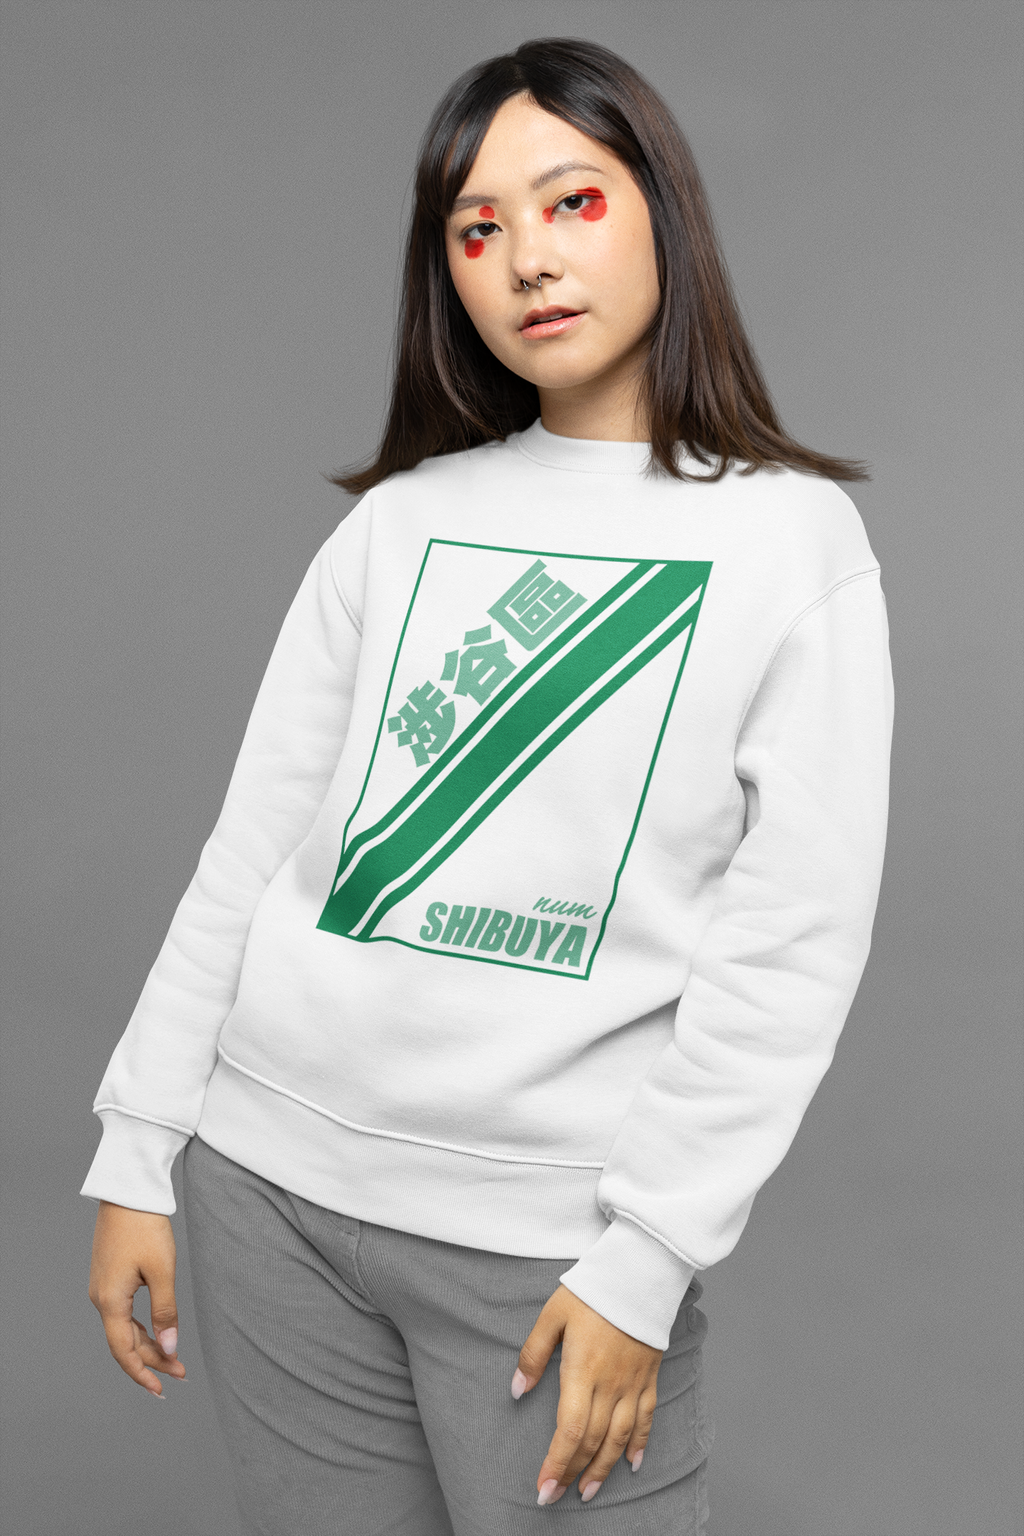 sweatshirt-mockup-of-a-young-woman-wearing-graphic-makeup-and-a-nose-piercing-m21267.png